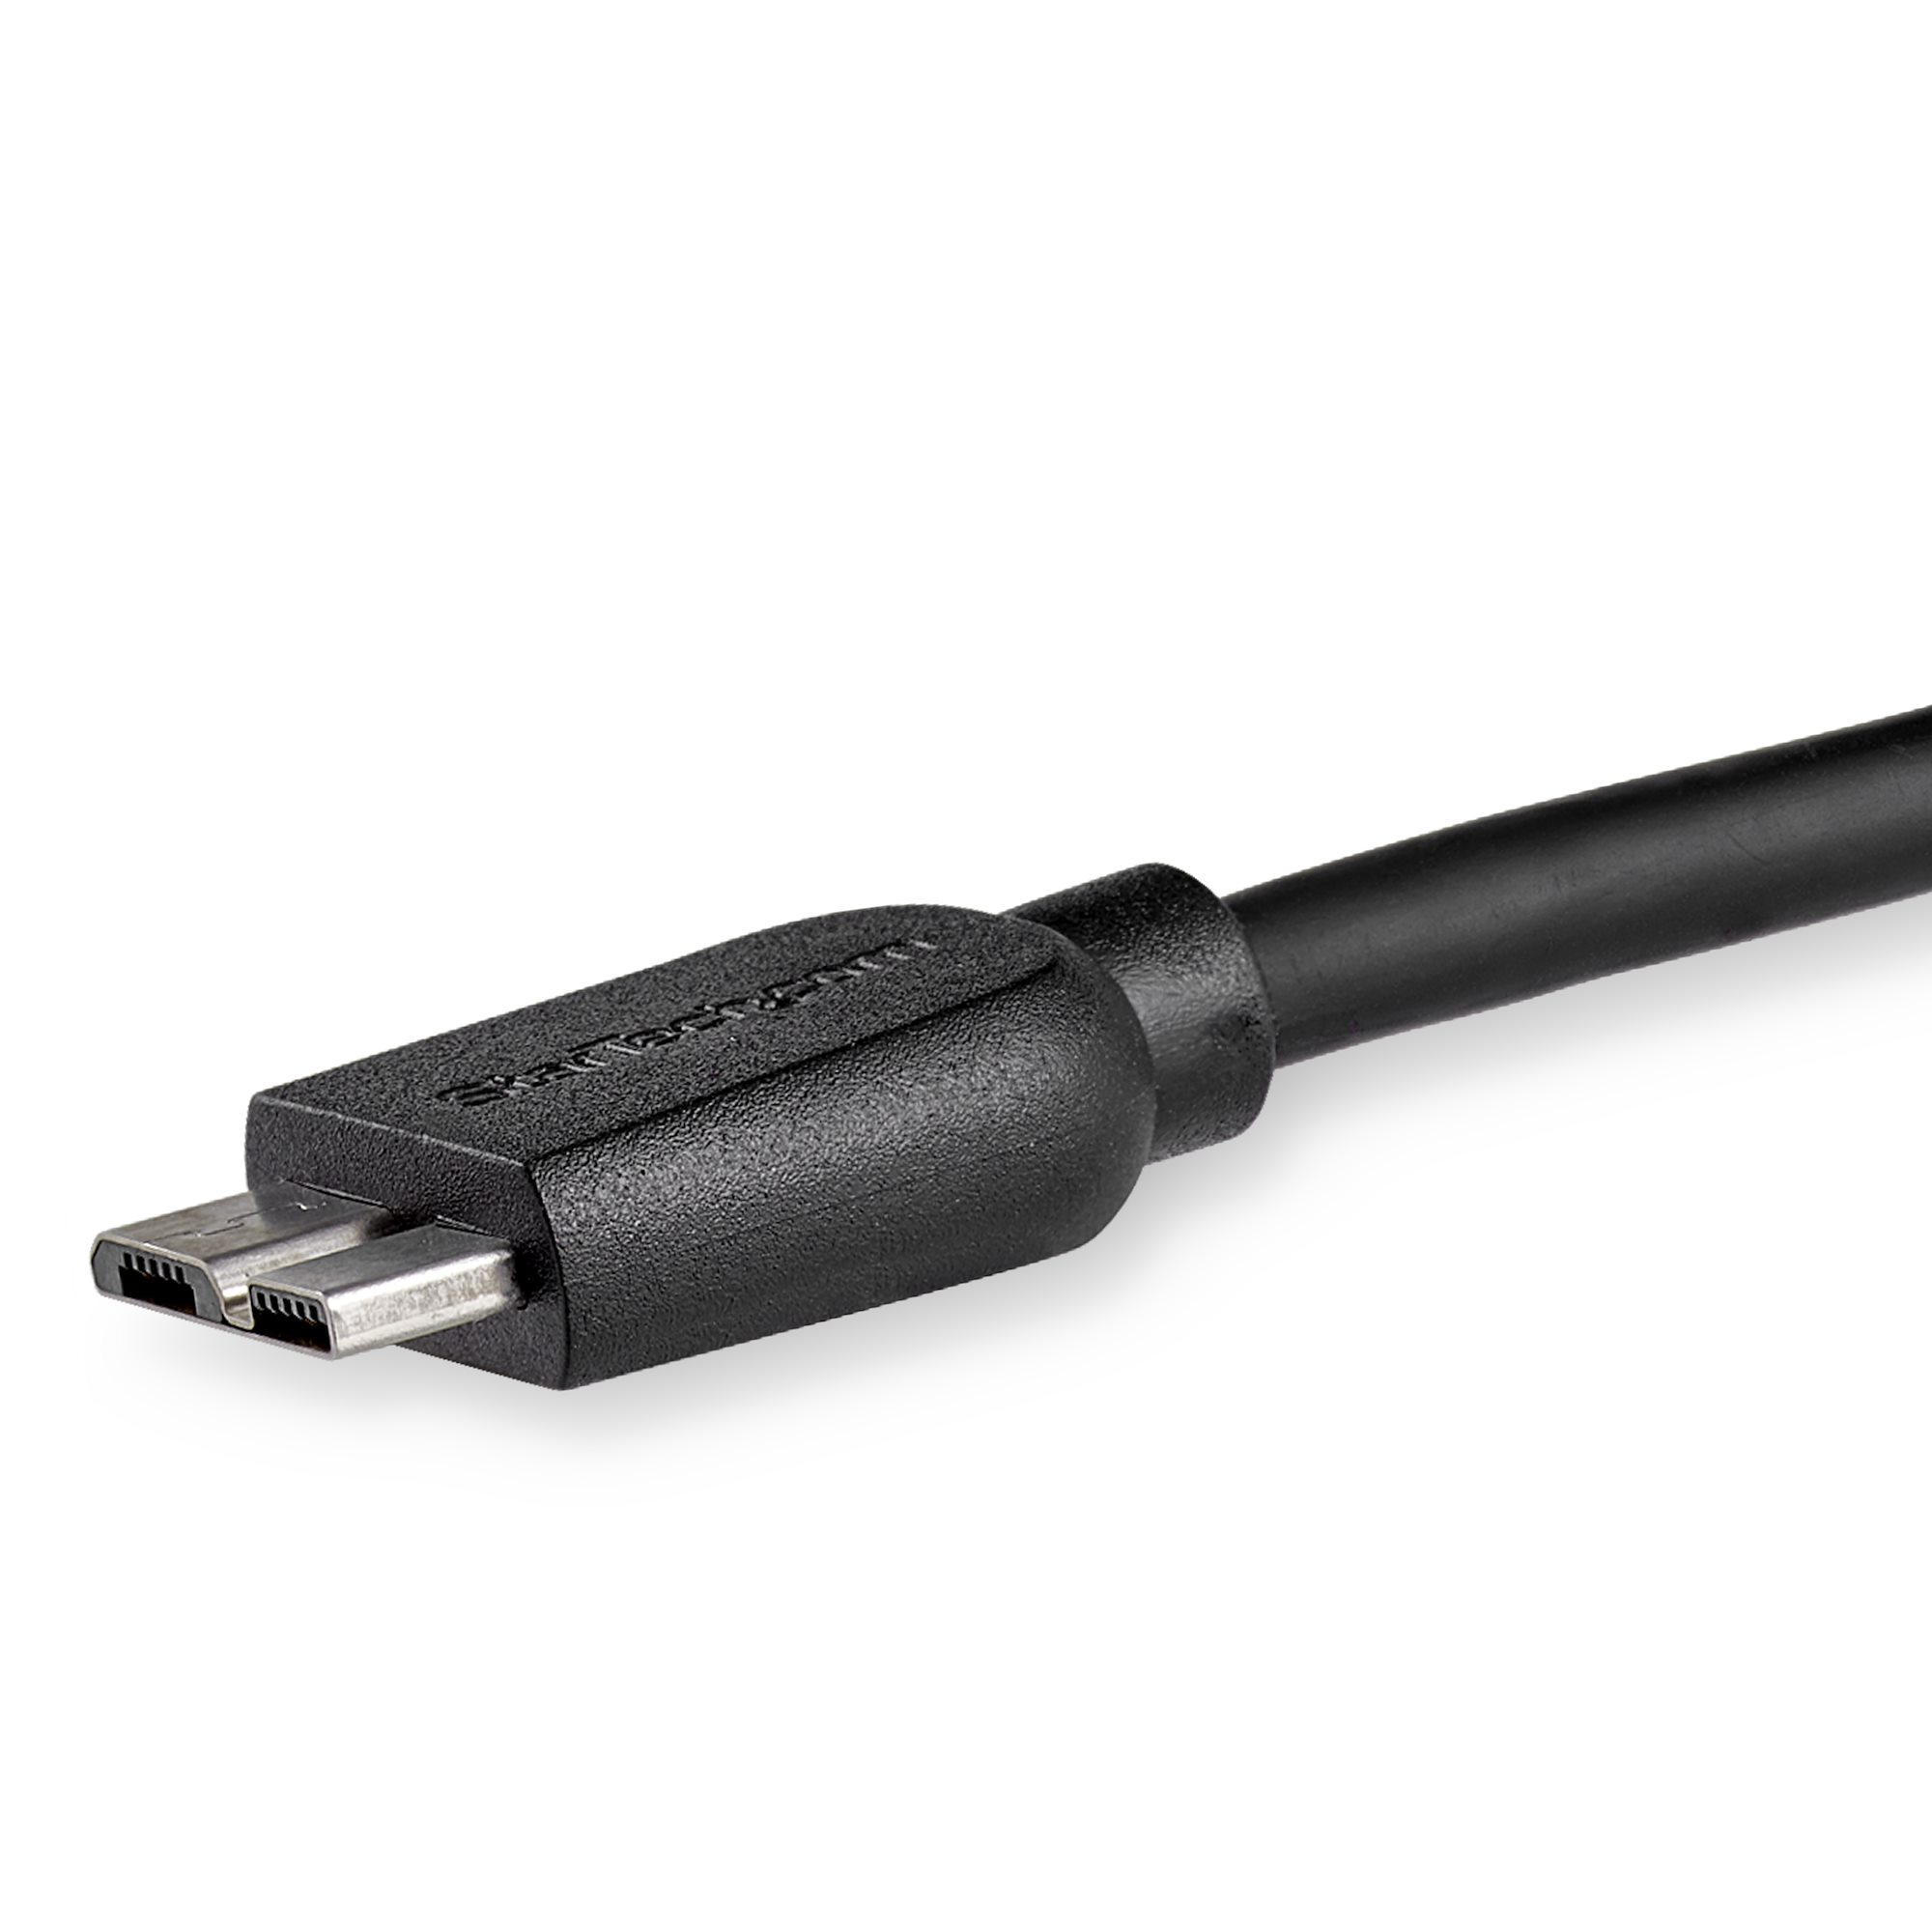 High-quality, high-performance data-comm products that supercharge profits  - USB 3.0 SuperSpeed Cable A to Micro B M/M - 6FT